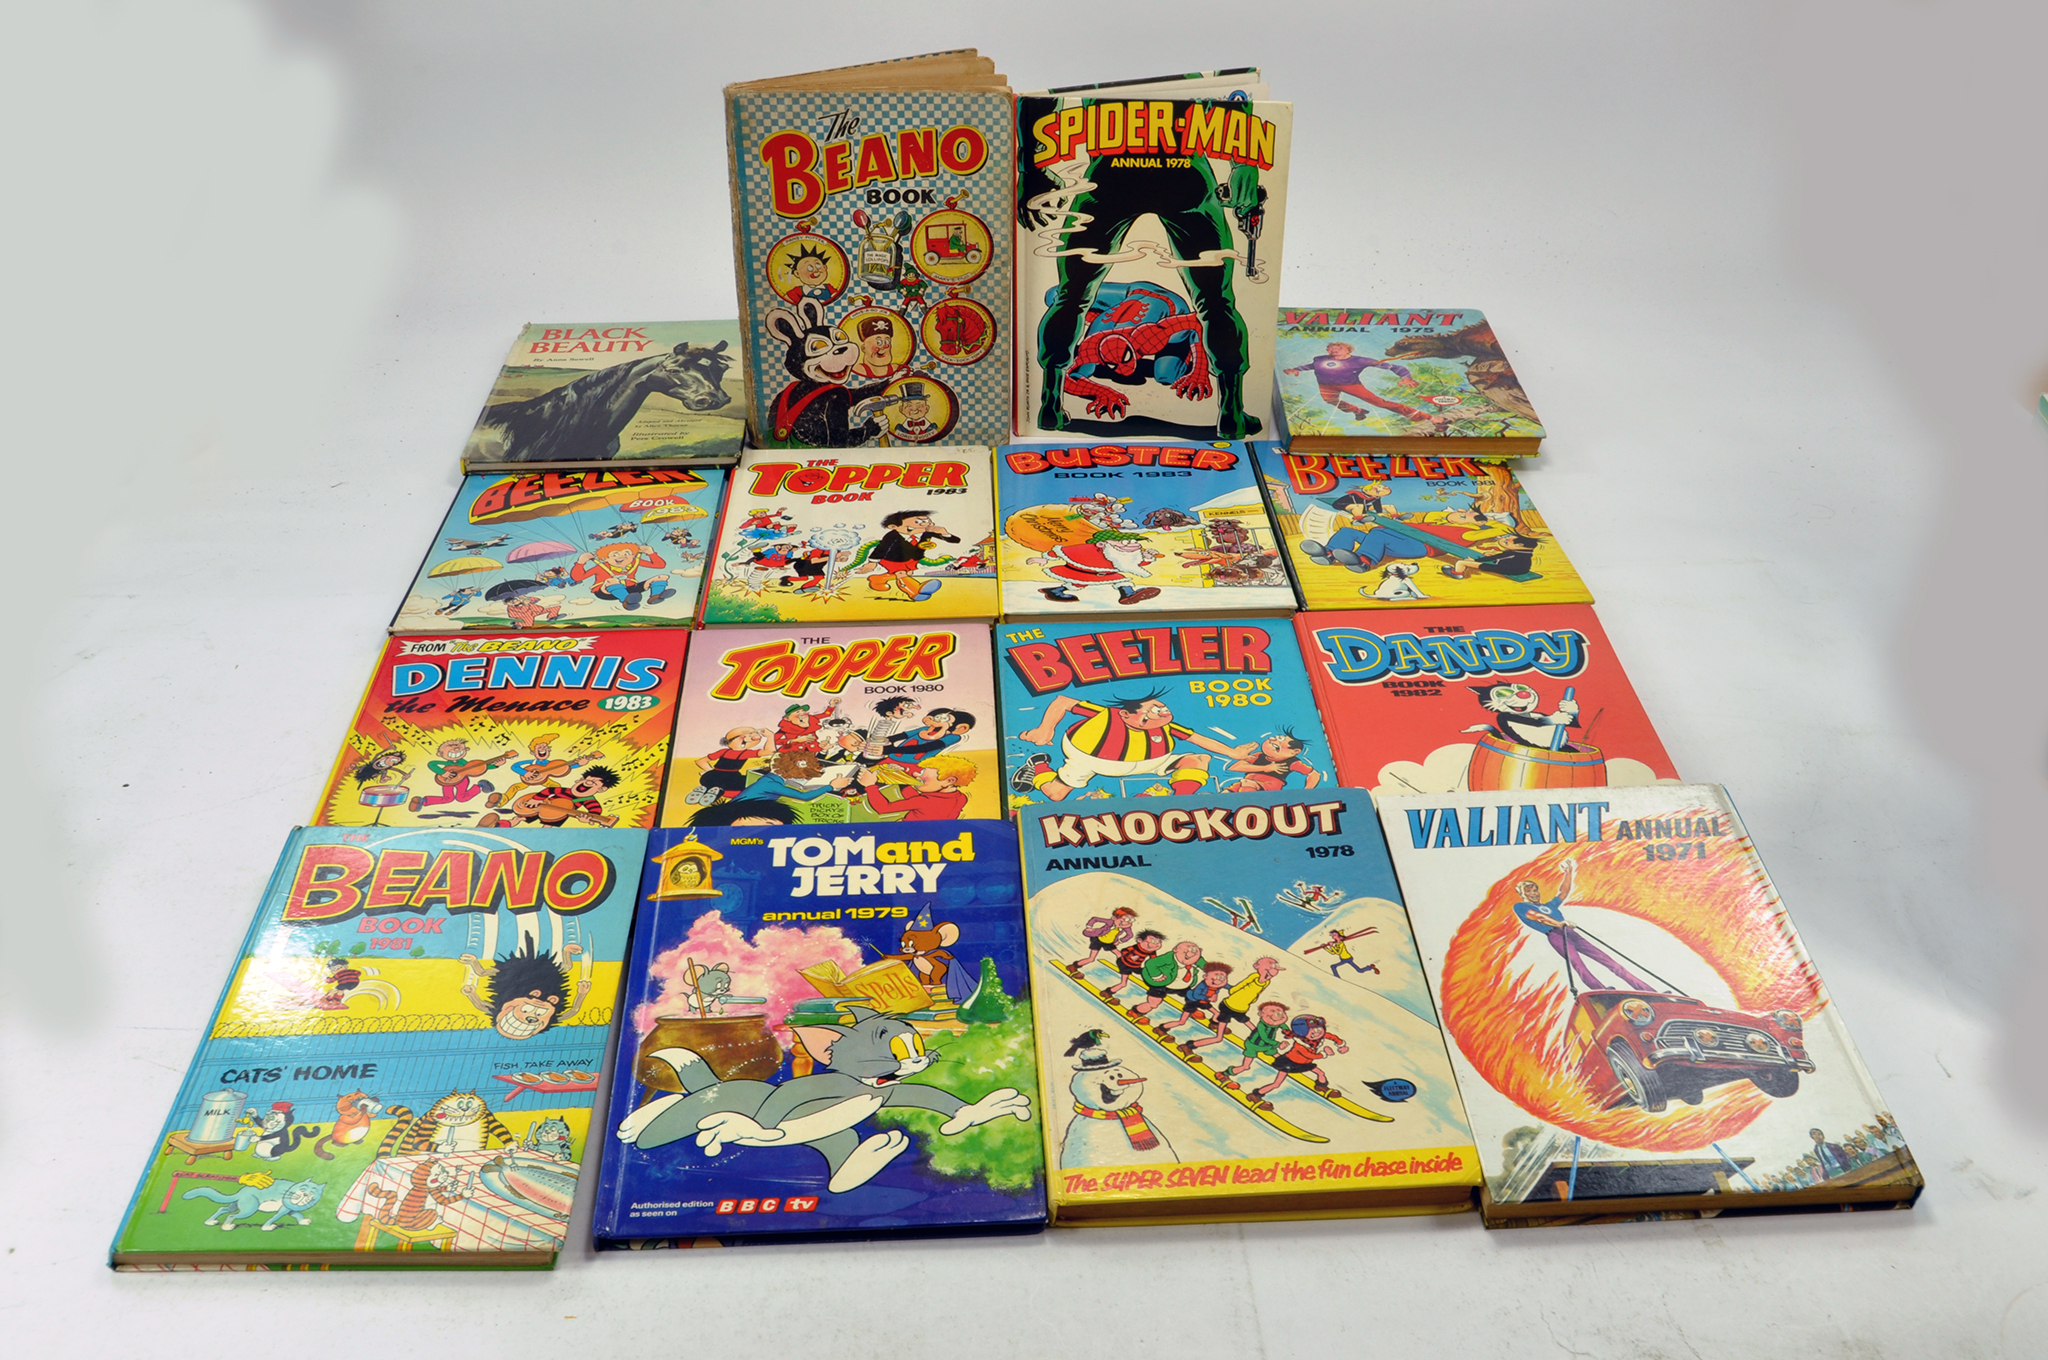 A high quality group of annuals including Beano, Spiderman and other TV Related Marvel etc